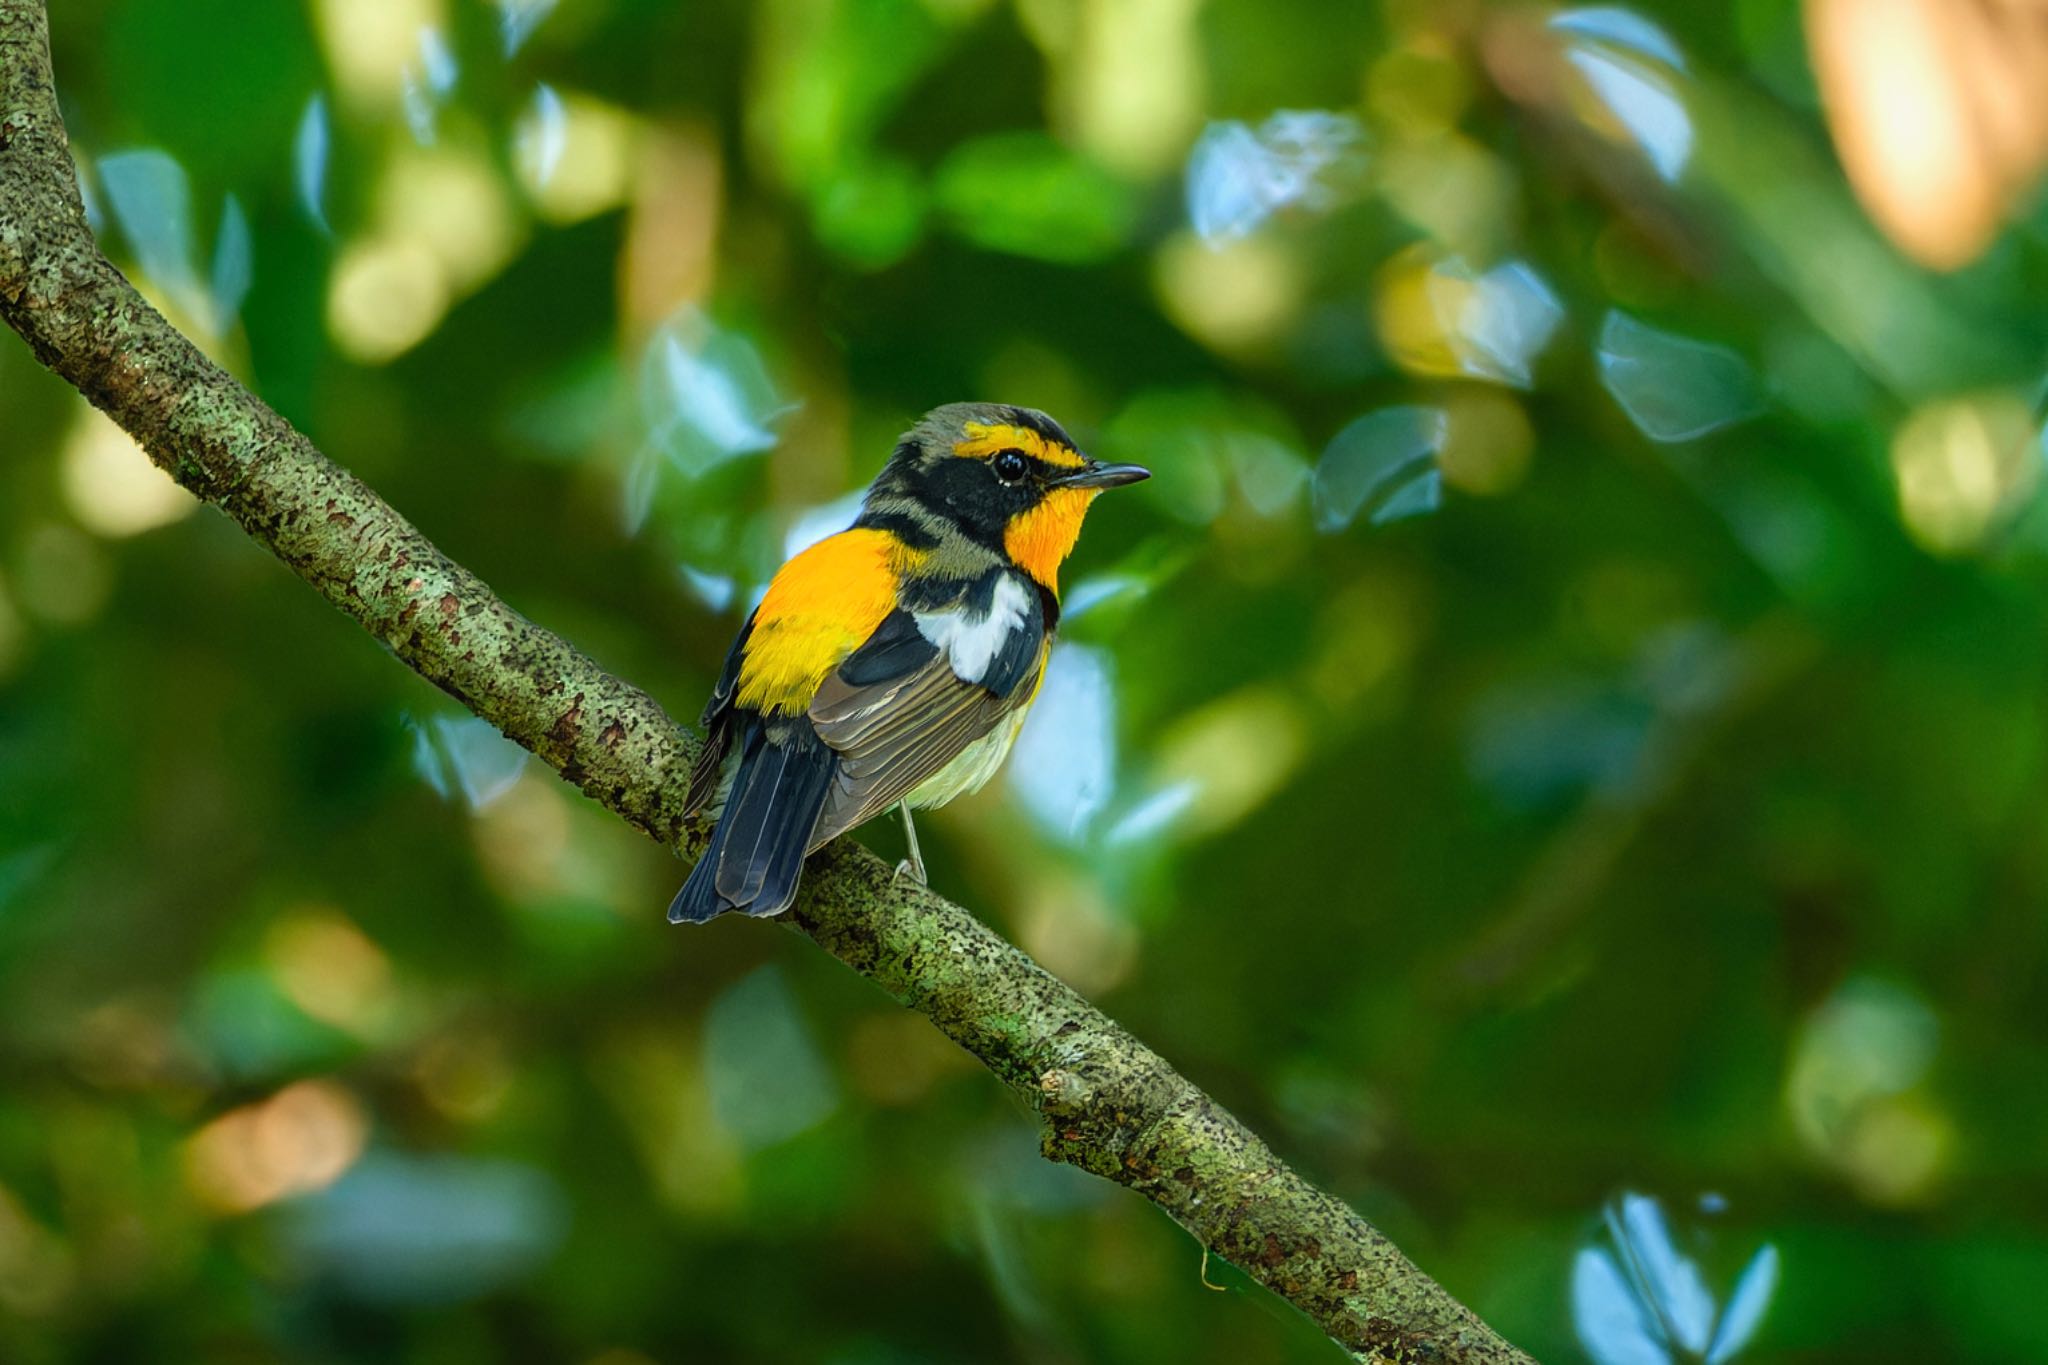 Photo of Narcissus Flycatcher at 菊池川白石堰河川公園 by FUJIマニア